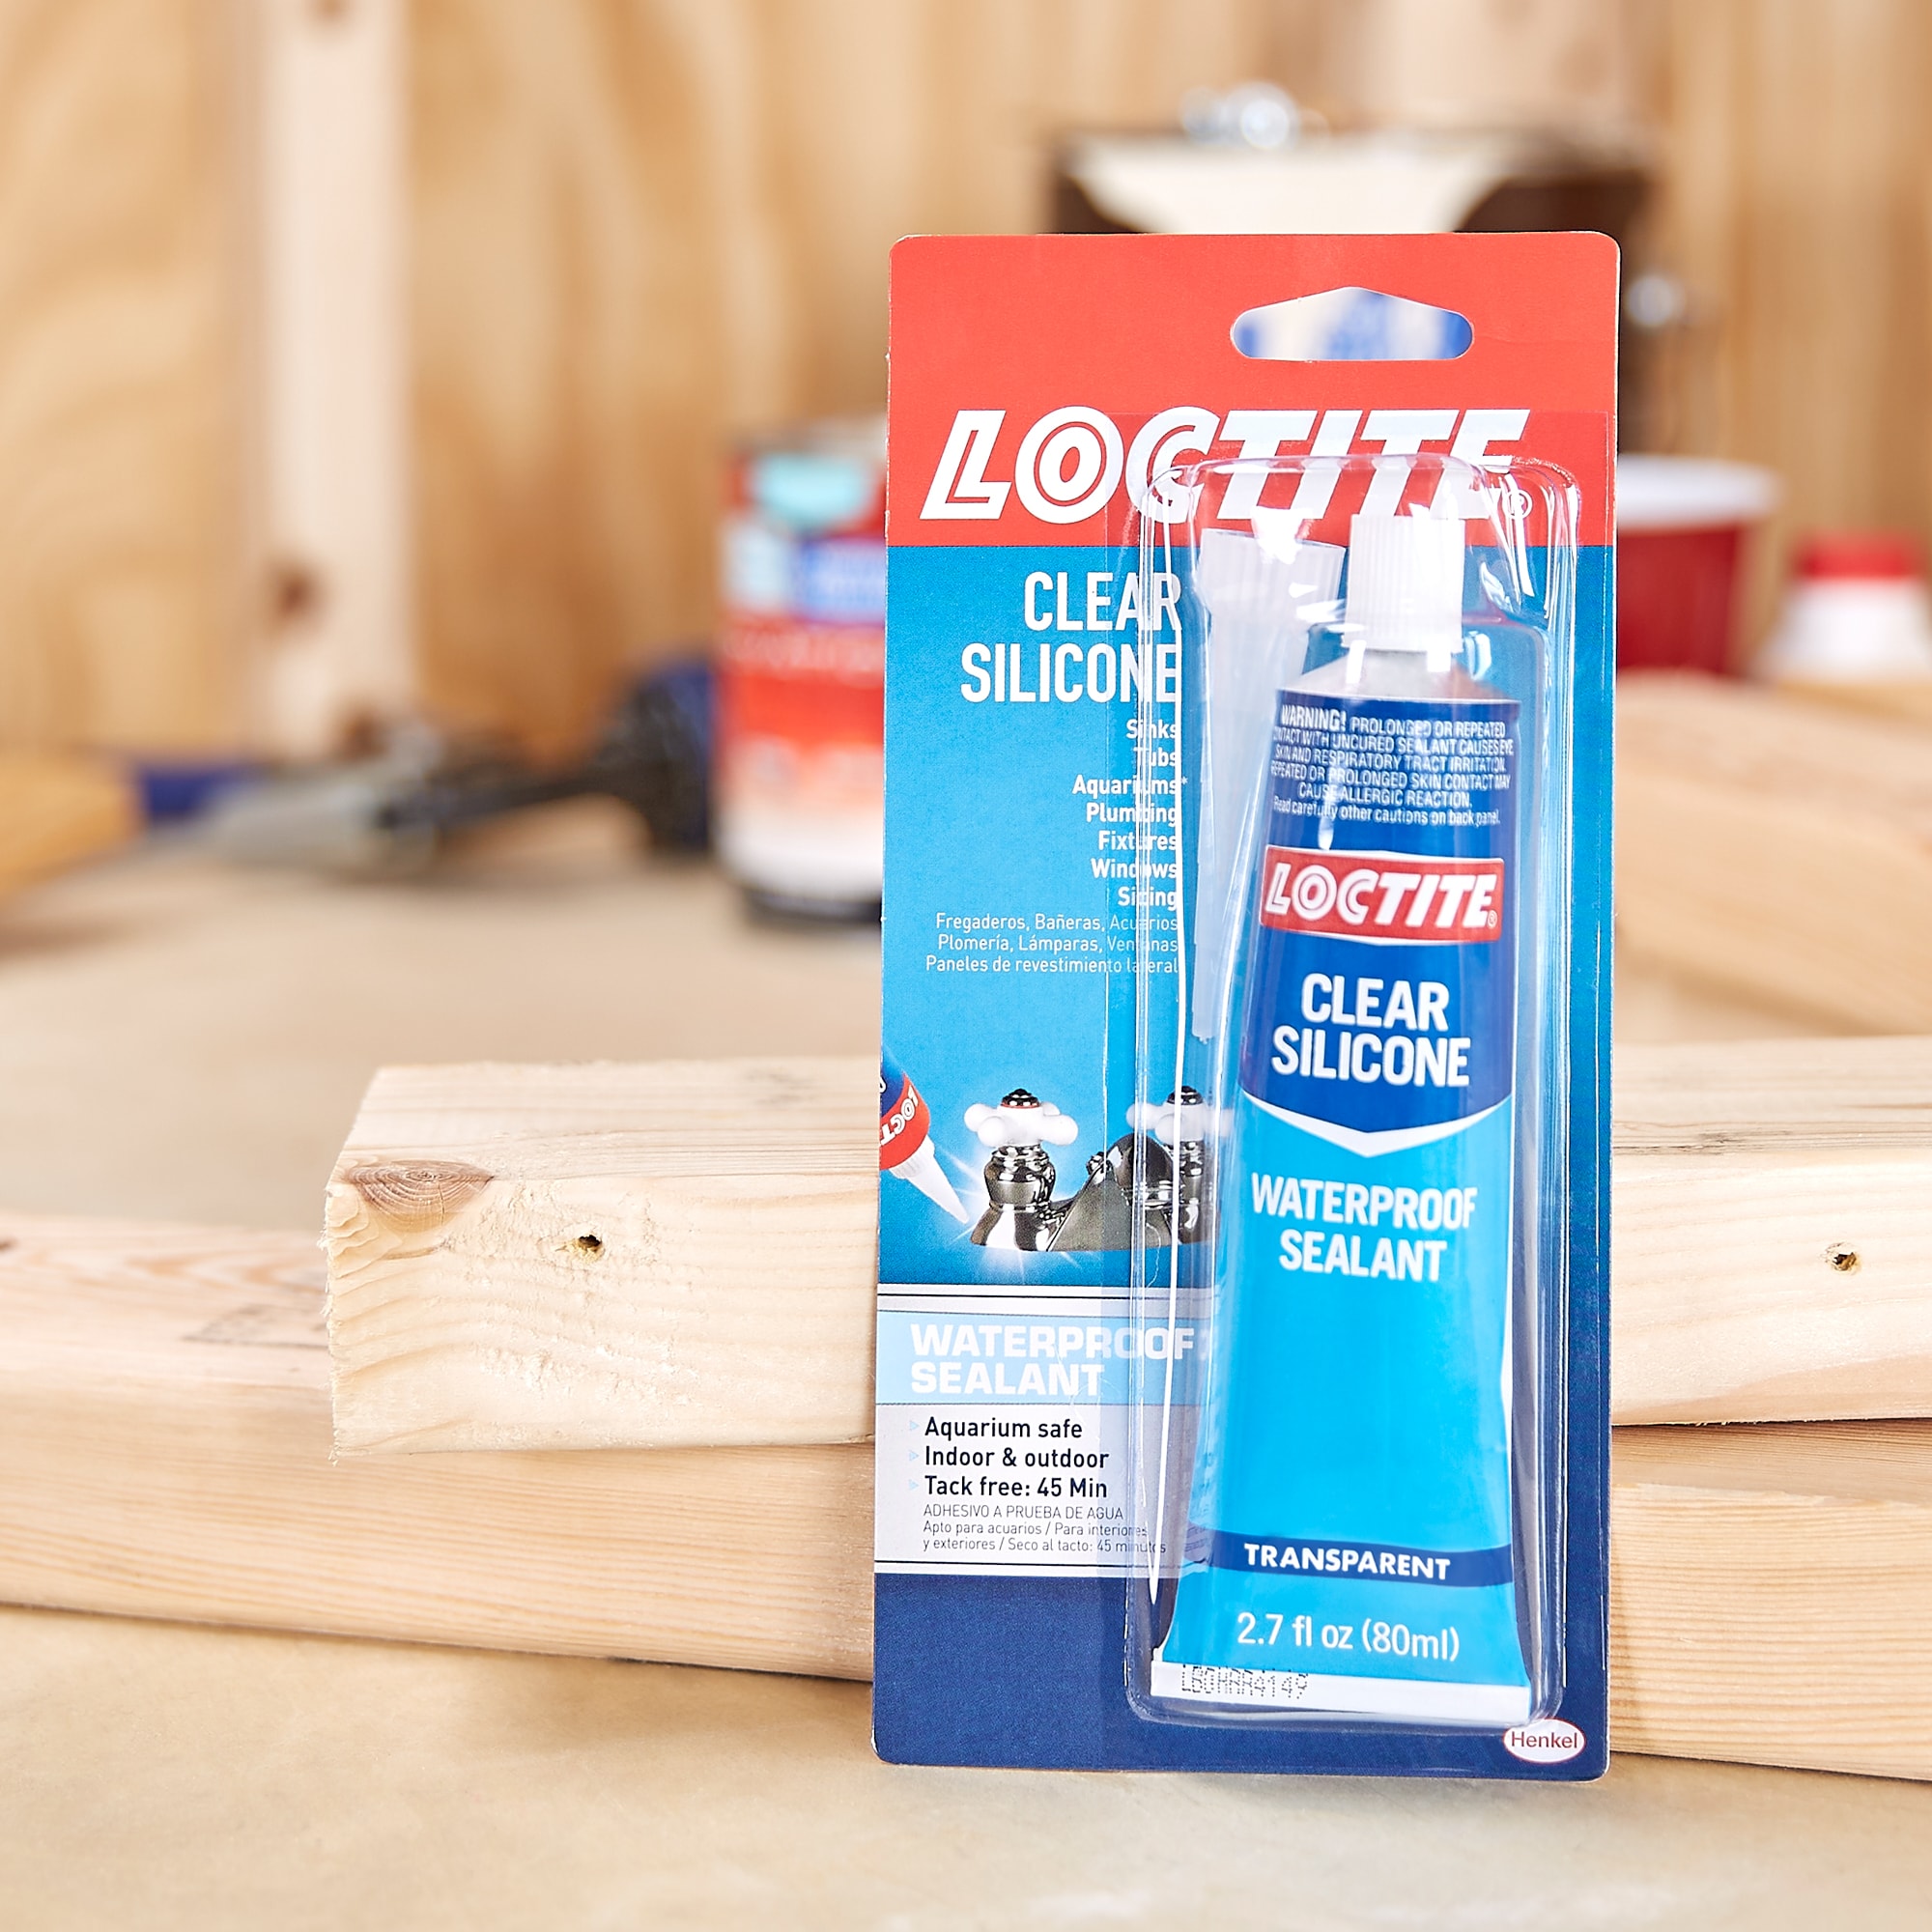 Loctite Clear Silicone Transparent Waterproof Sealant